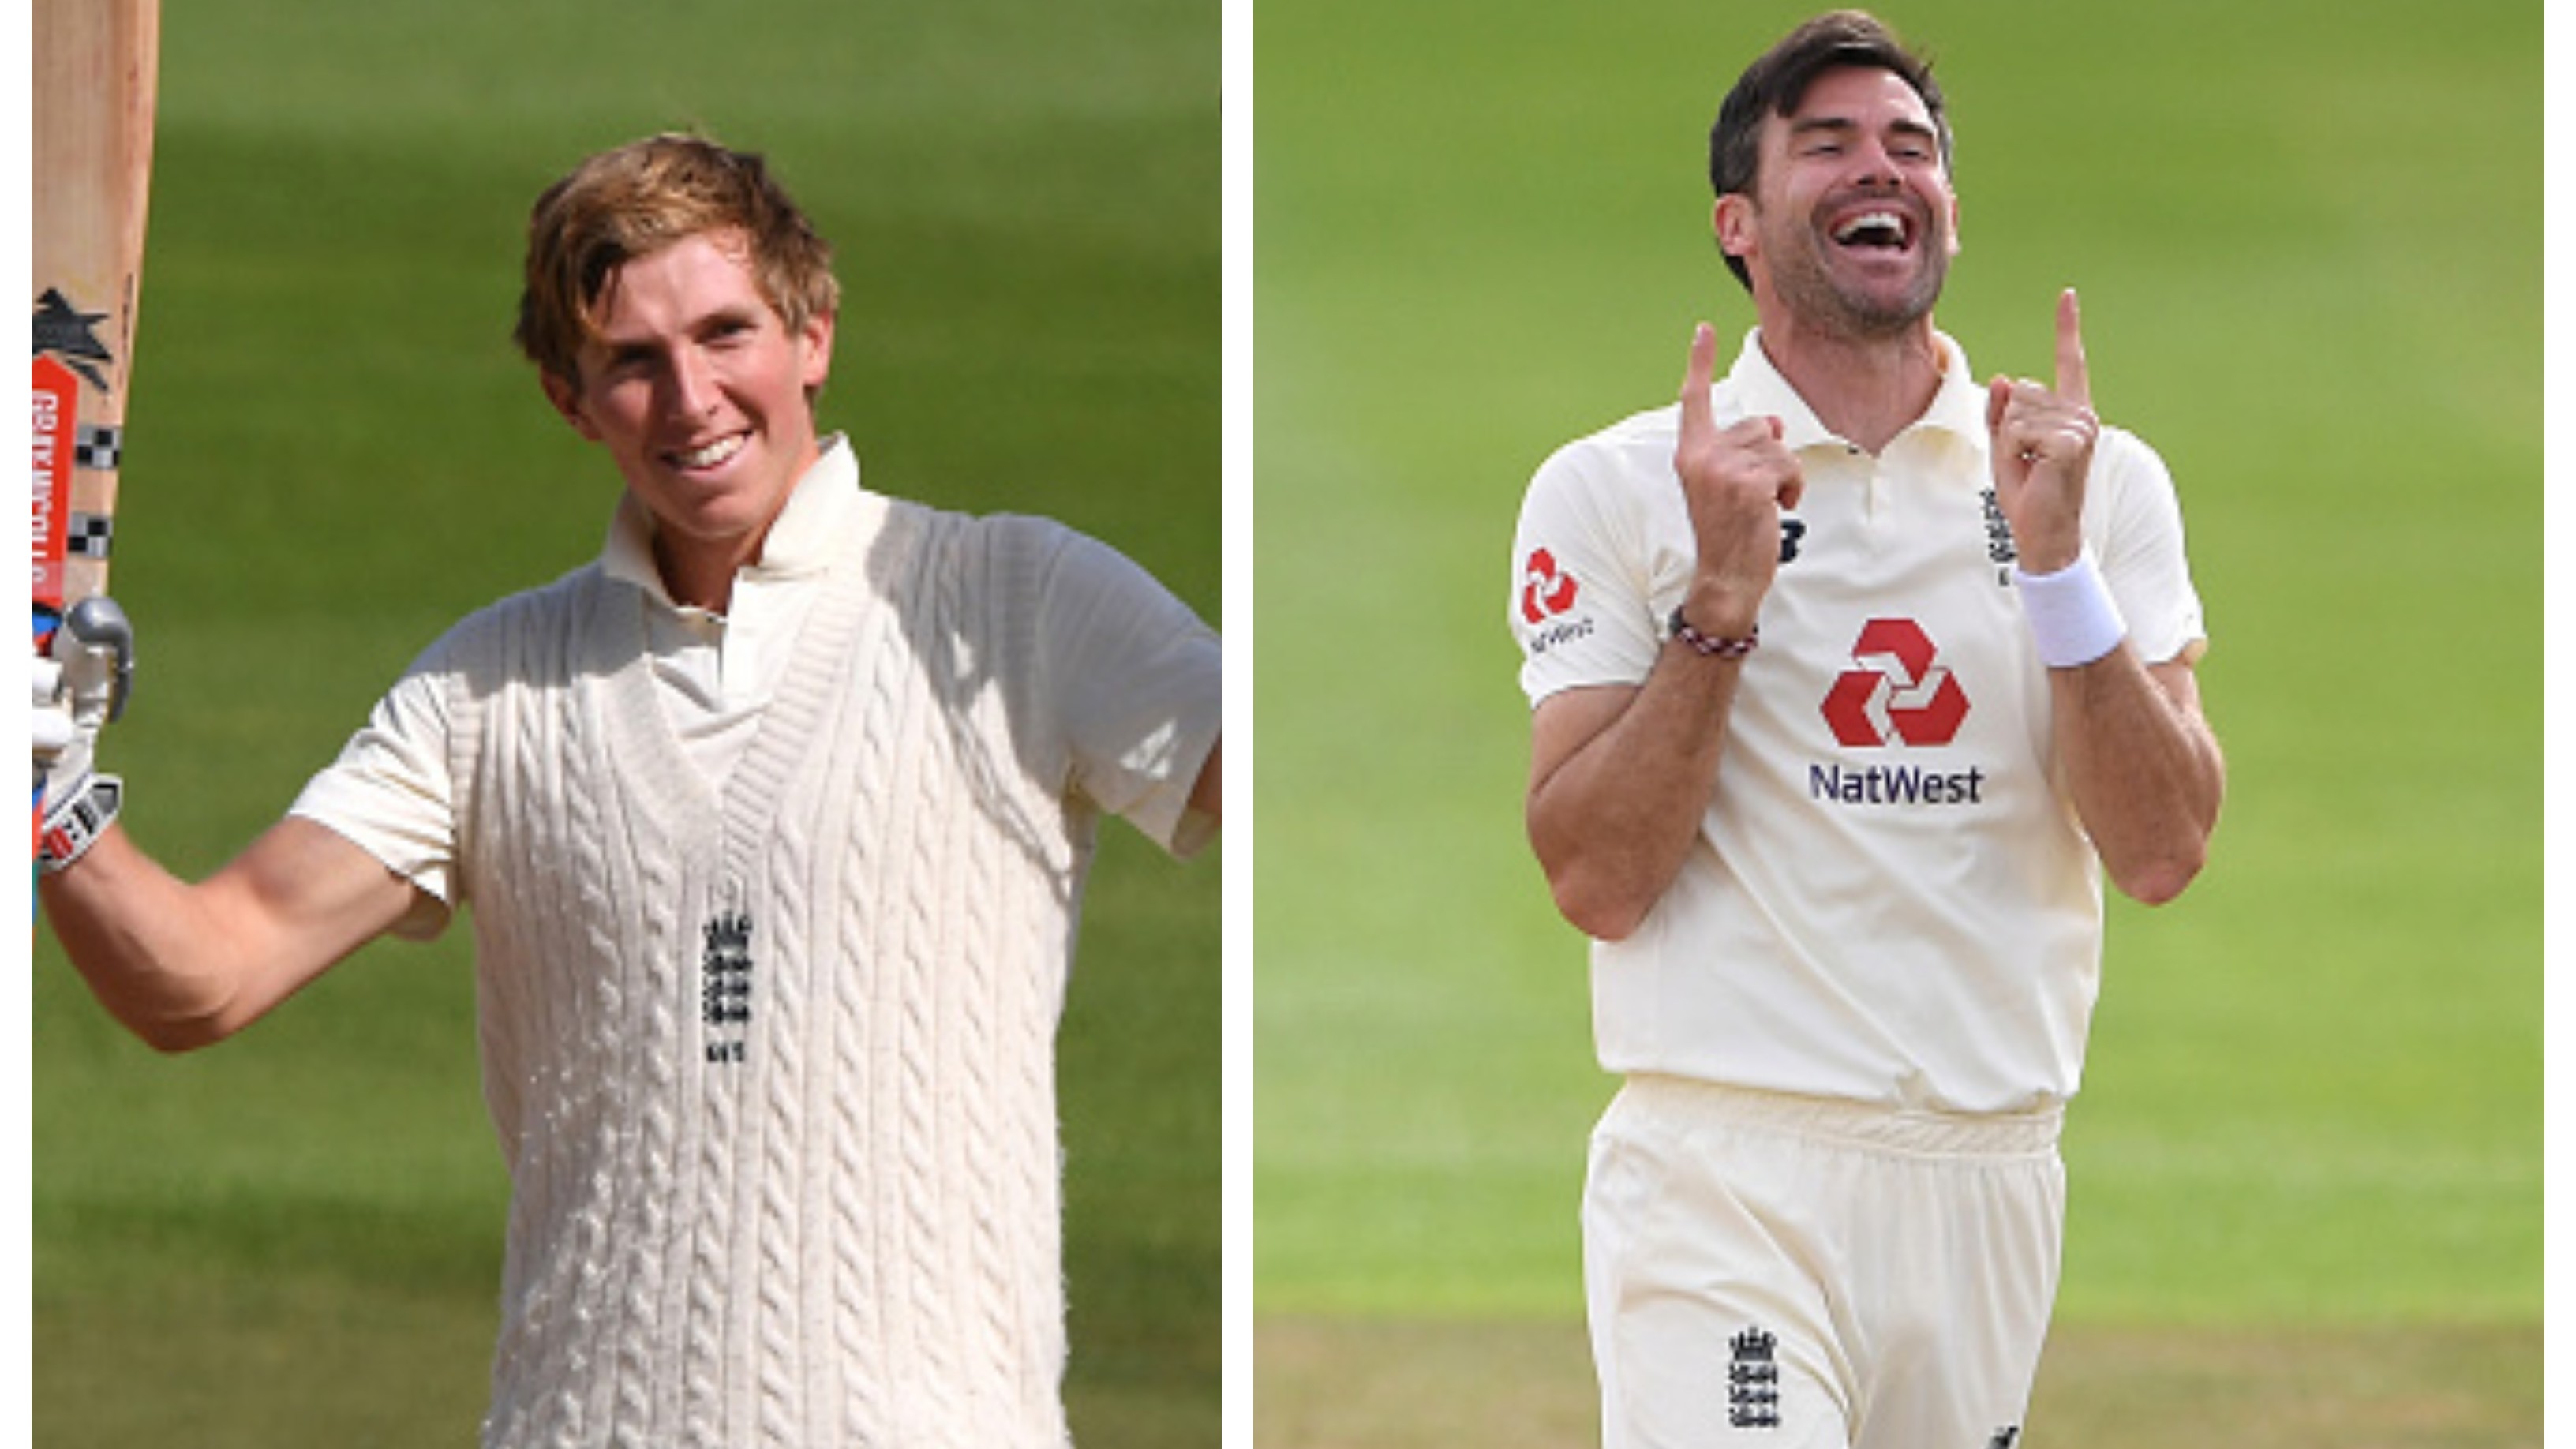 ENG v PAK 2020: Crawley, Anderson make significant gains in ICC Test rankings after Pakistan series